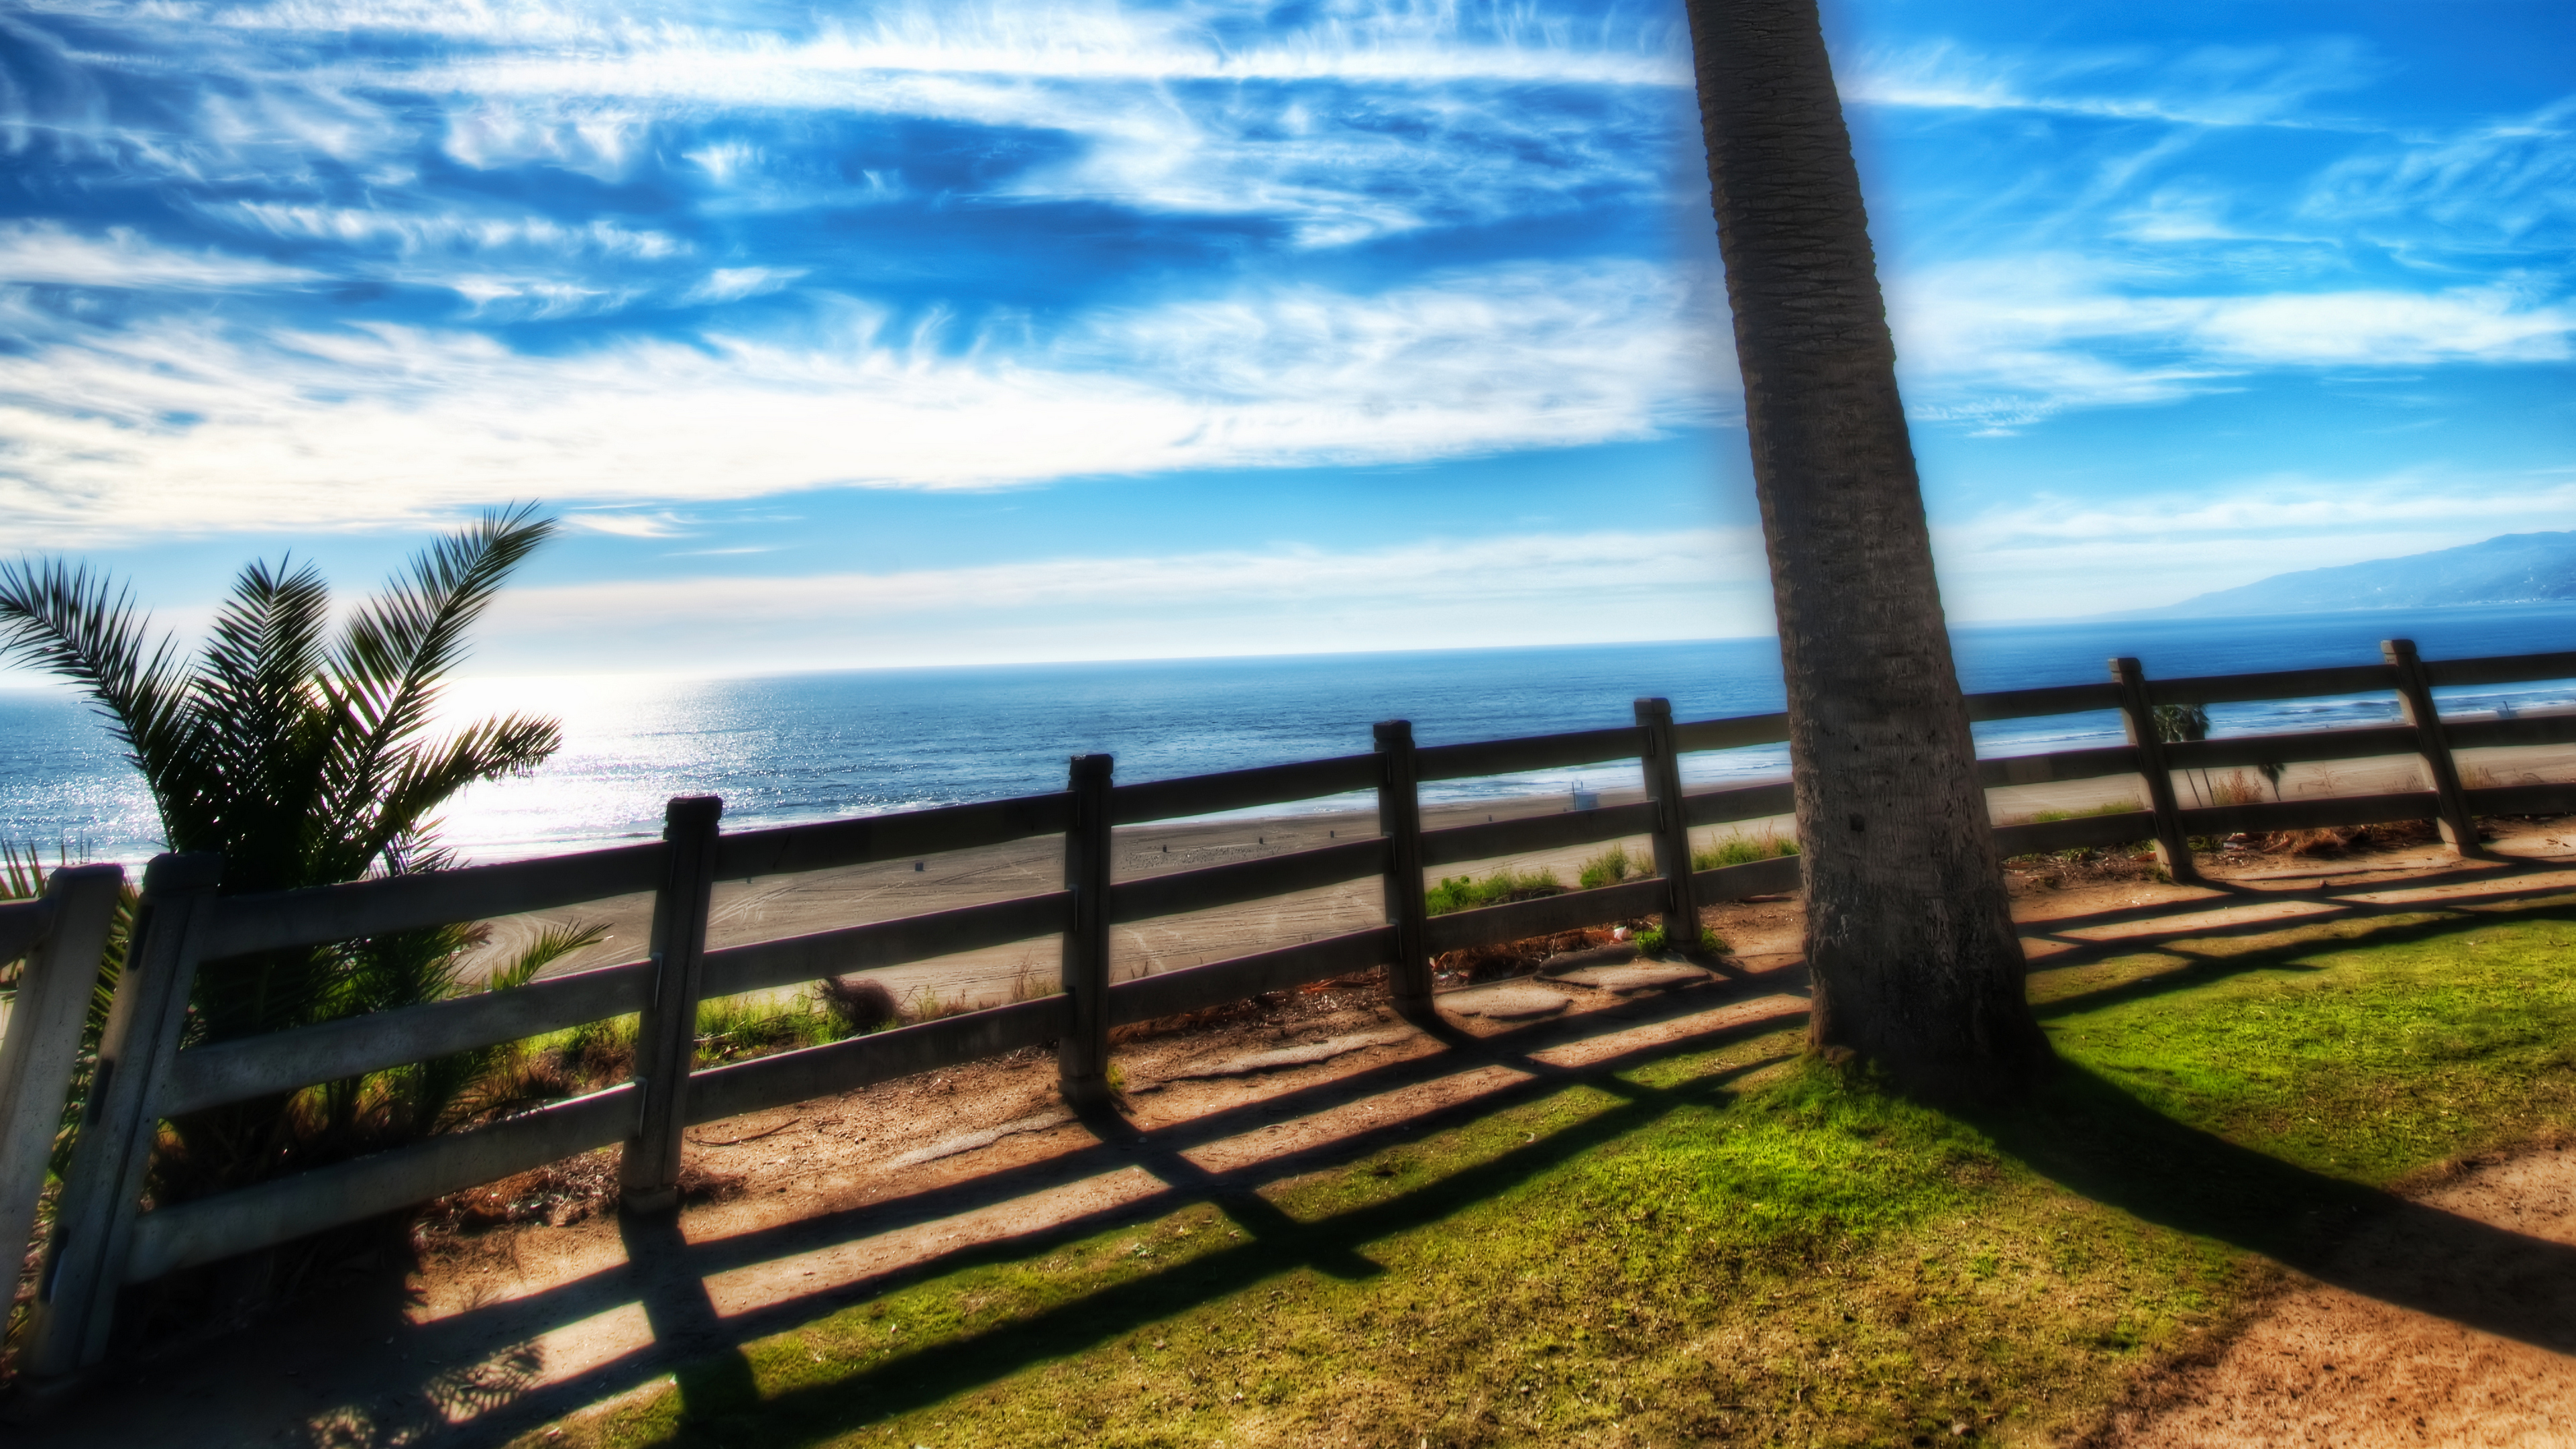 General 3840x2160 Trey Ratcliff photography beach sky clouds water trees